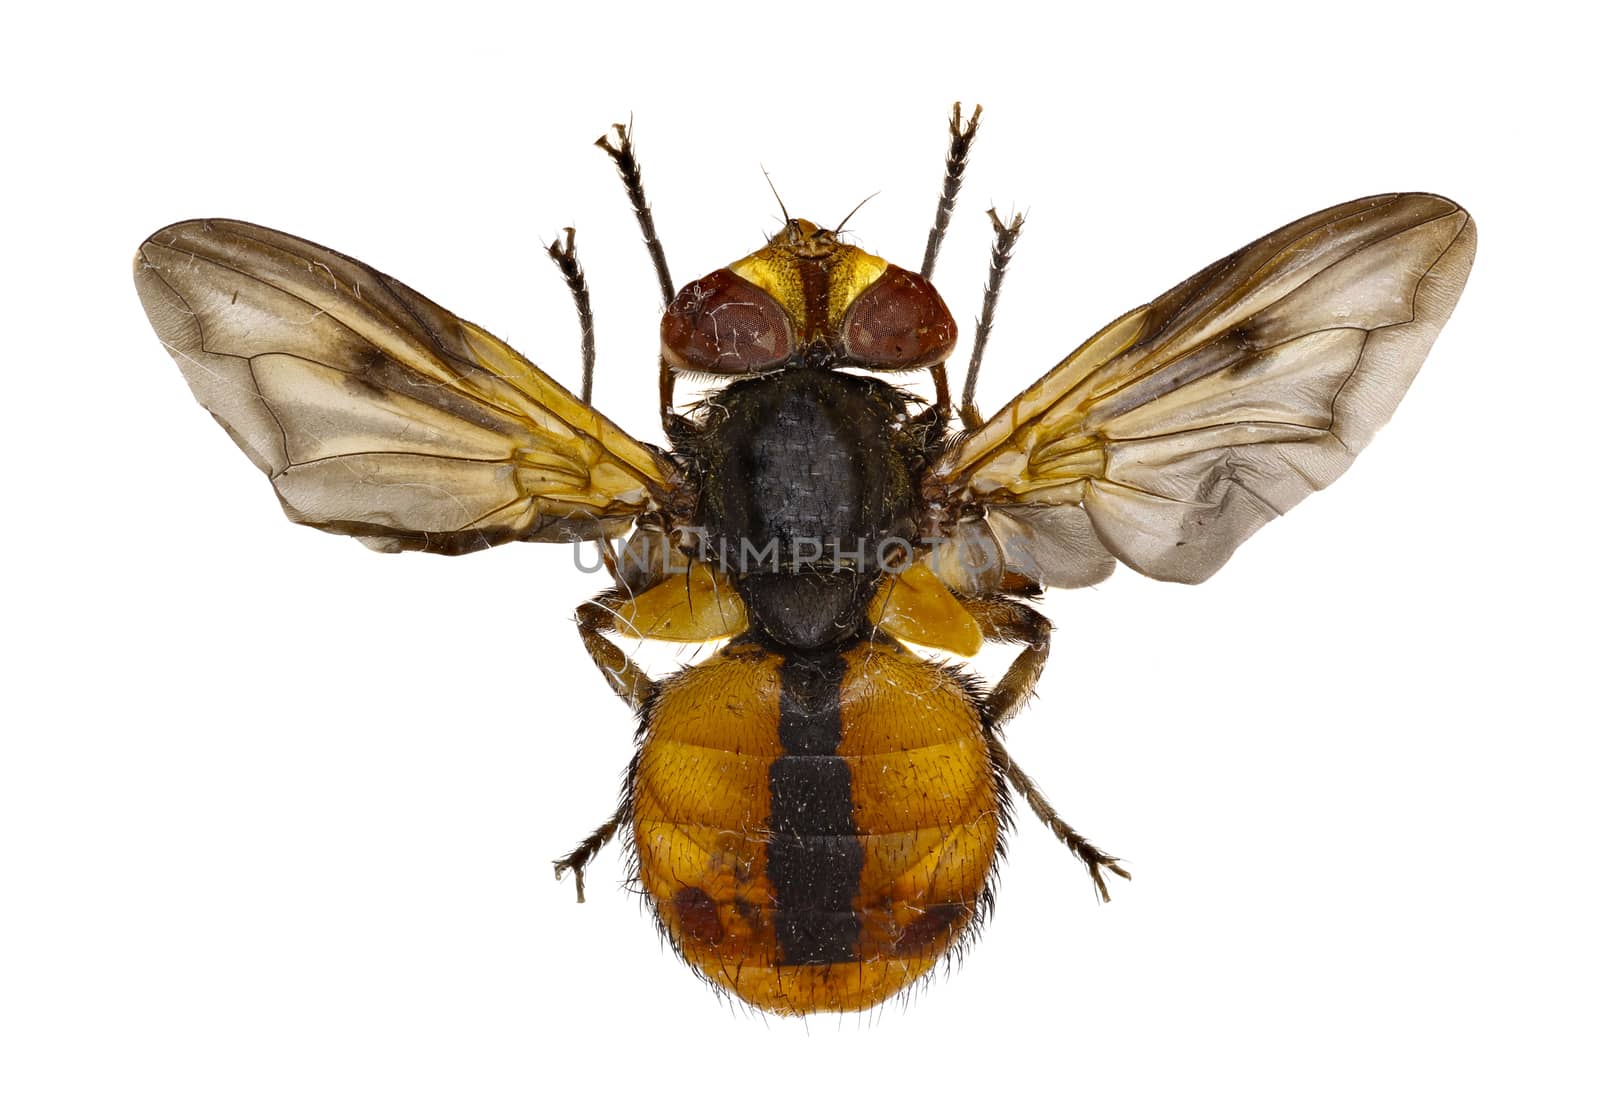 Tachinid Fly Ectophasia on white Background  -  Ectophasia crassipennis (Fabricius, 1794) by gstalker